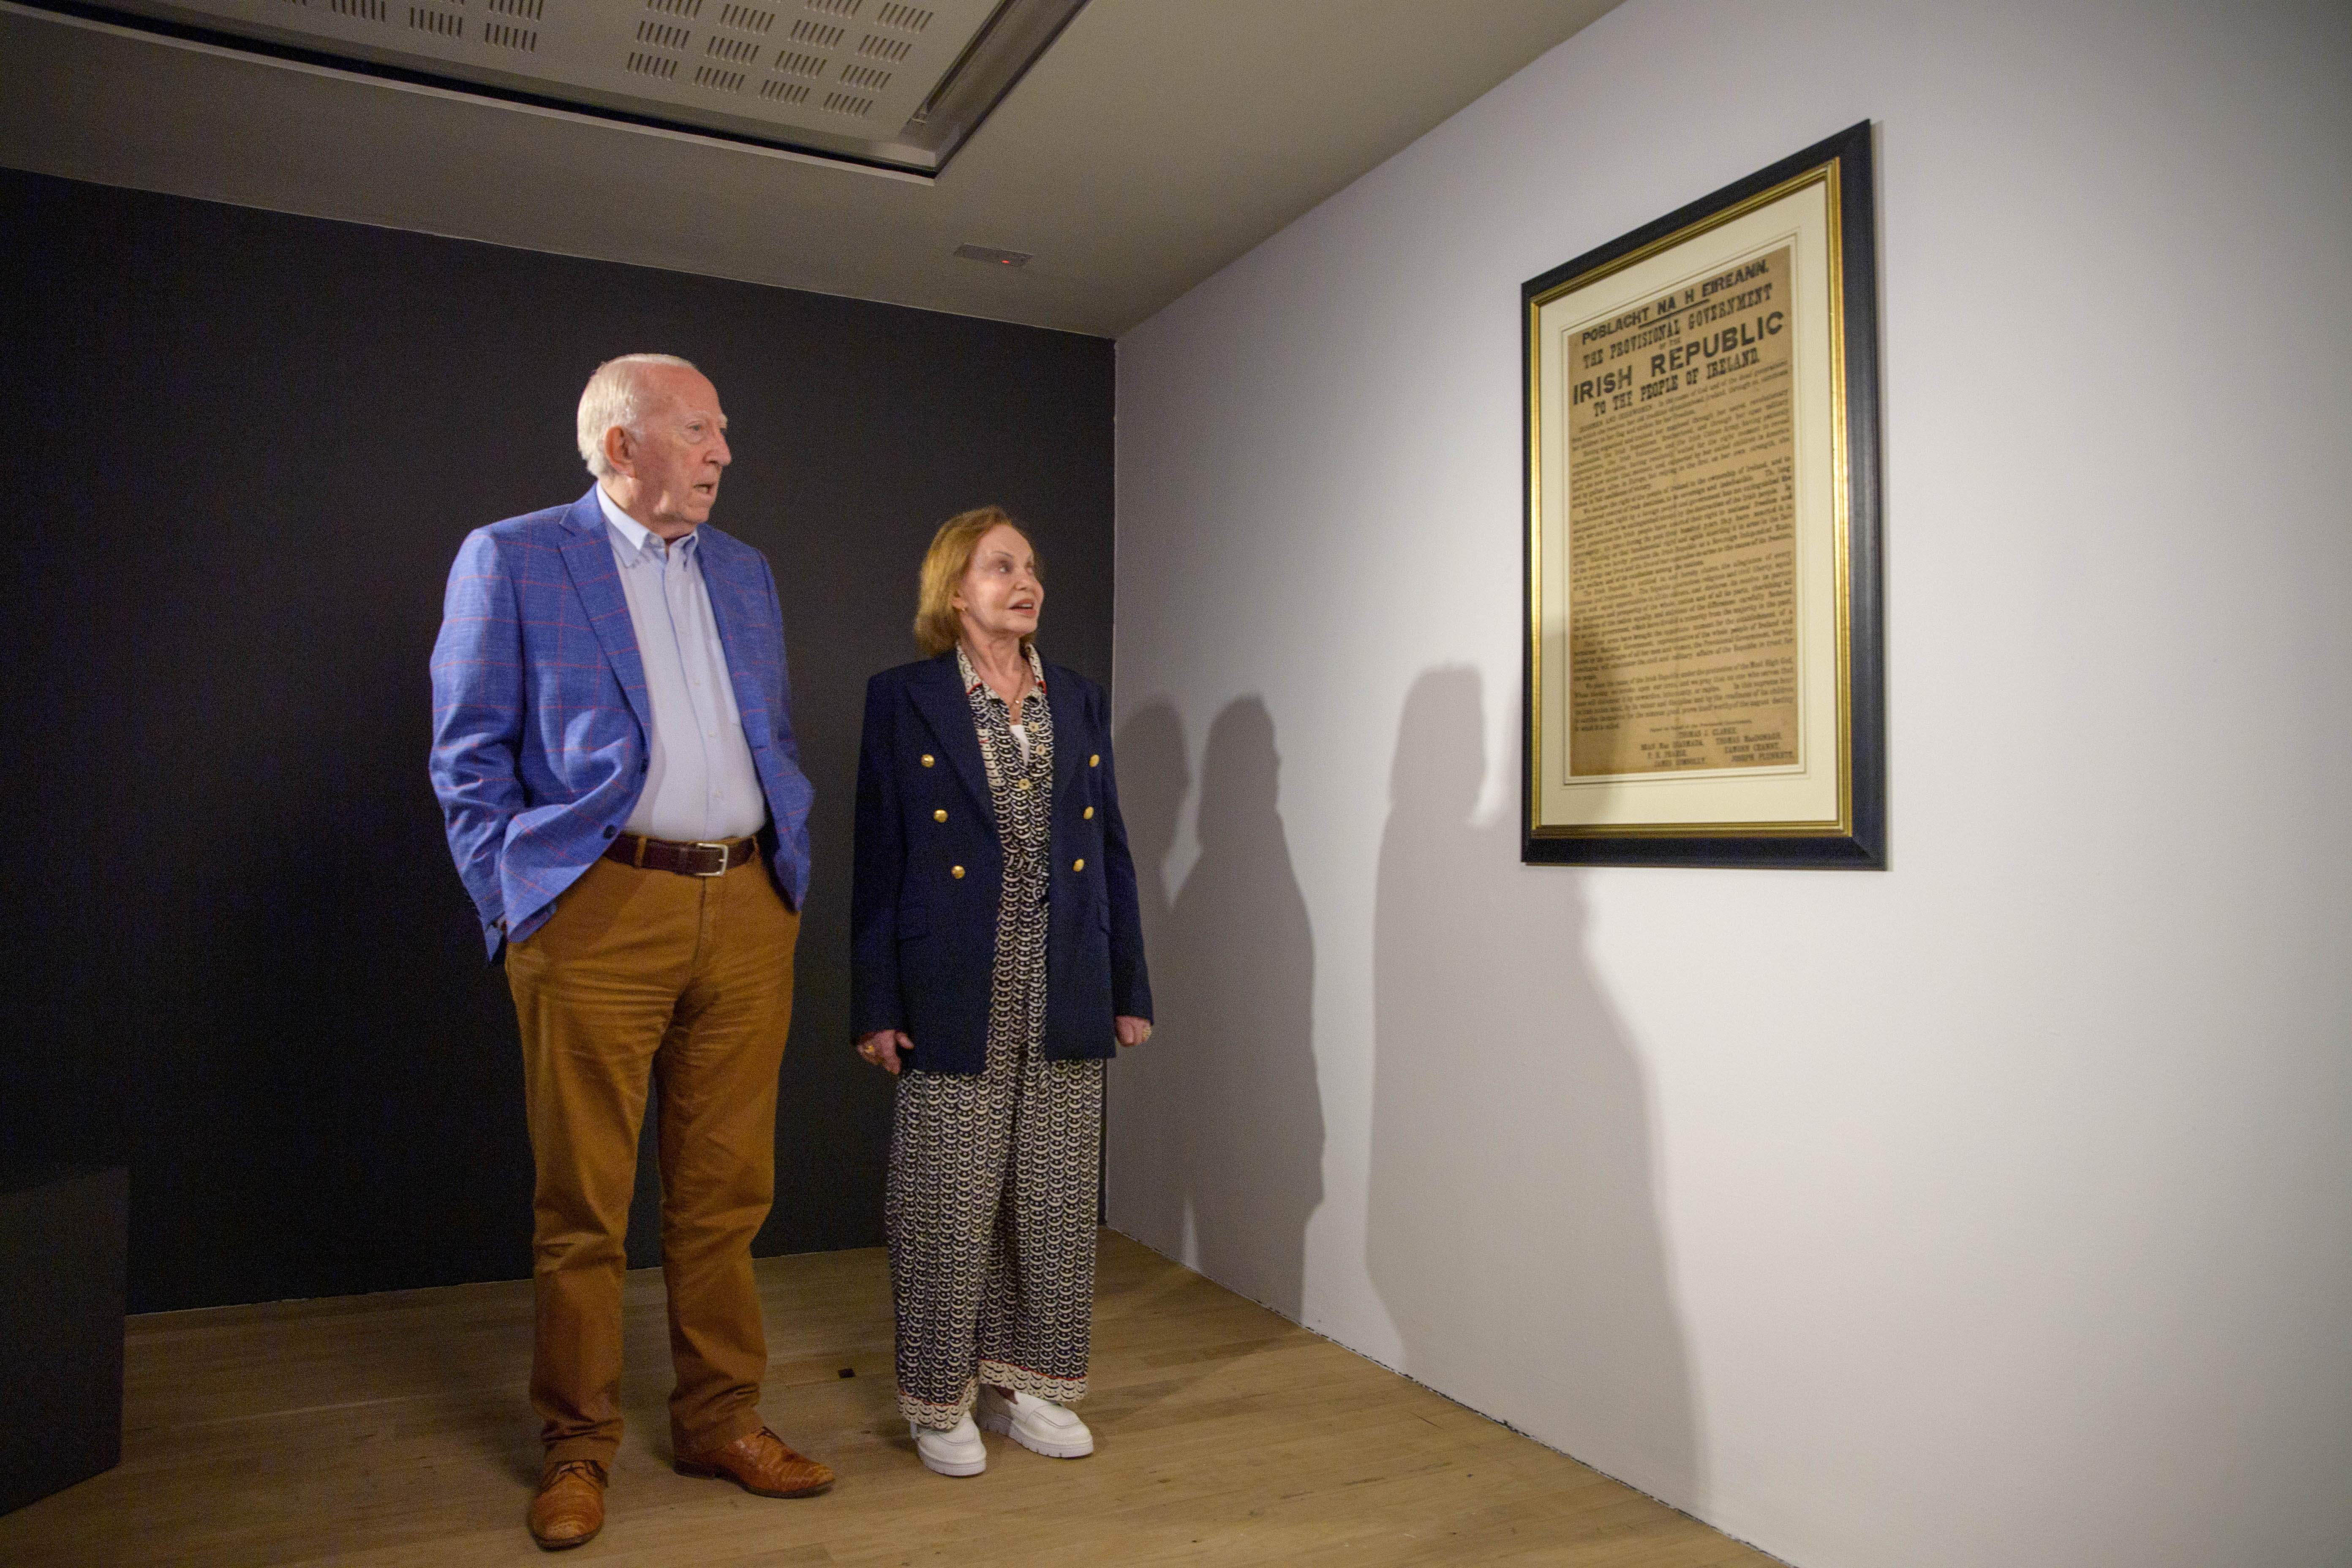 Liam and Kaye Cronin donated the proclamation to the university. 'UCC is a university with deep heritage in Irish history and it is wonderful that this remarkable document will now be preserved for future generations' commented Liam.